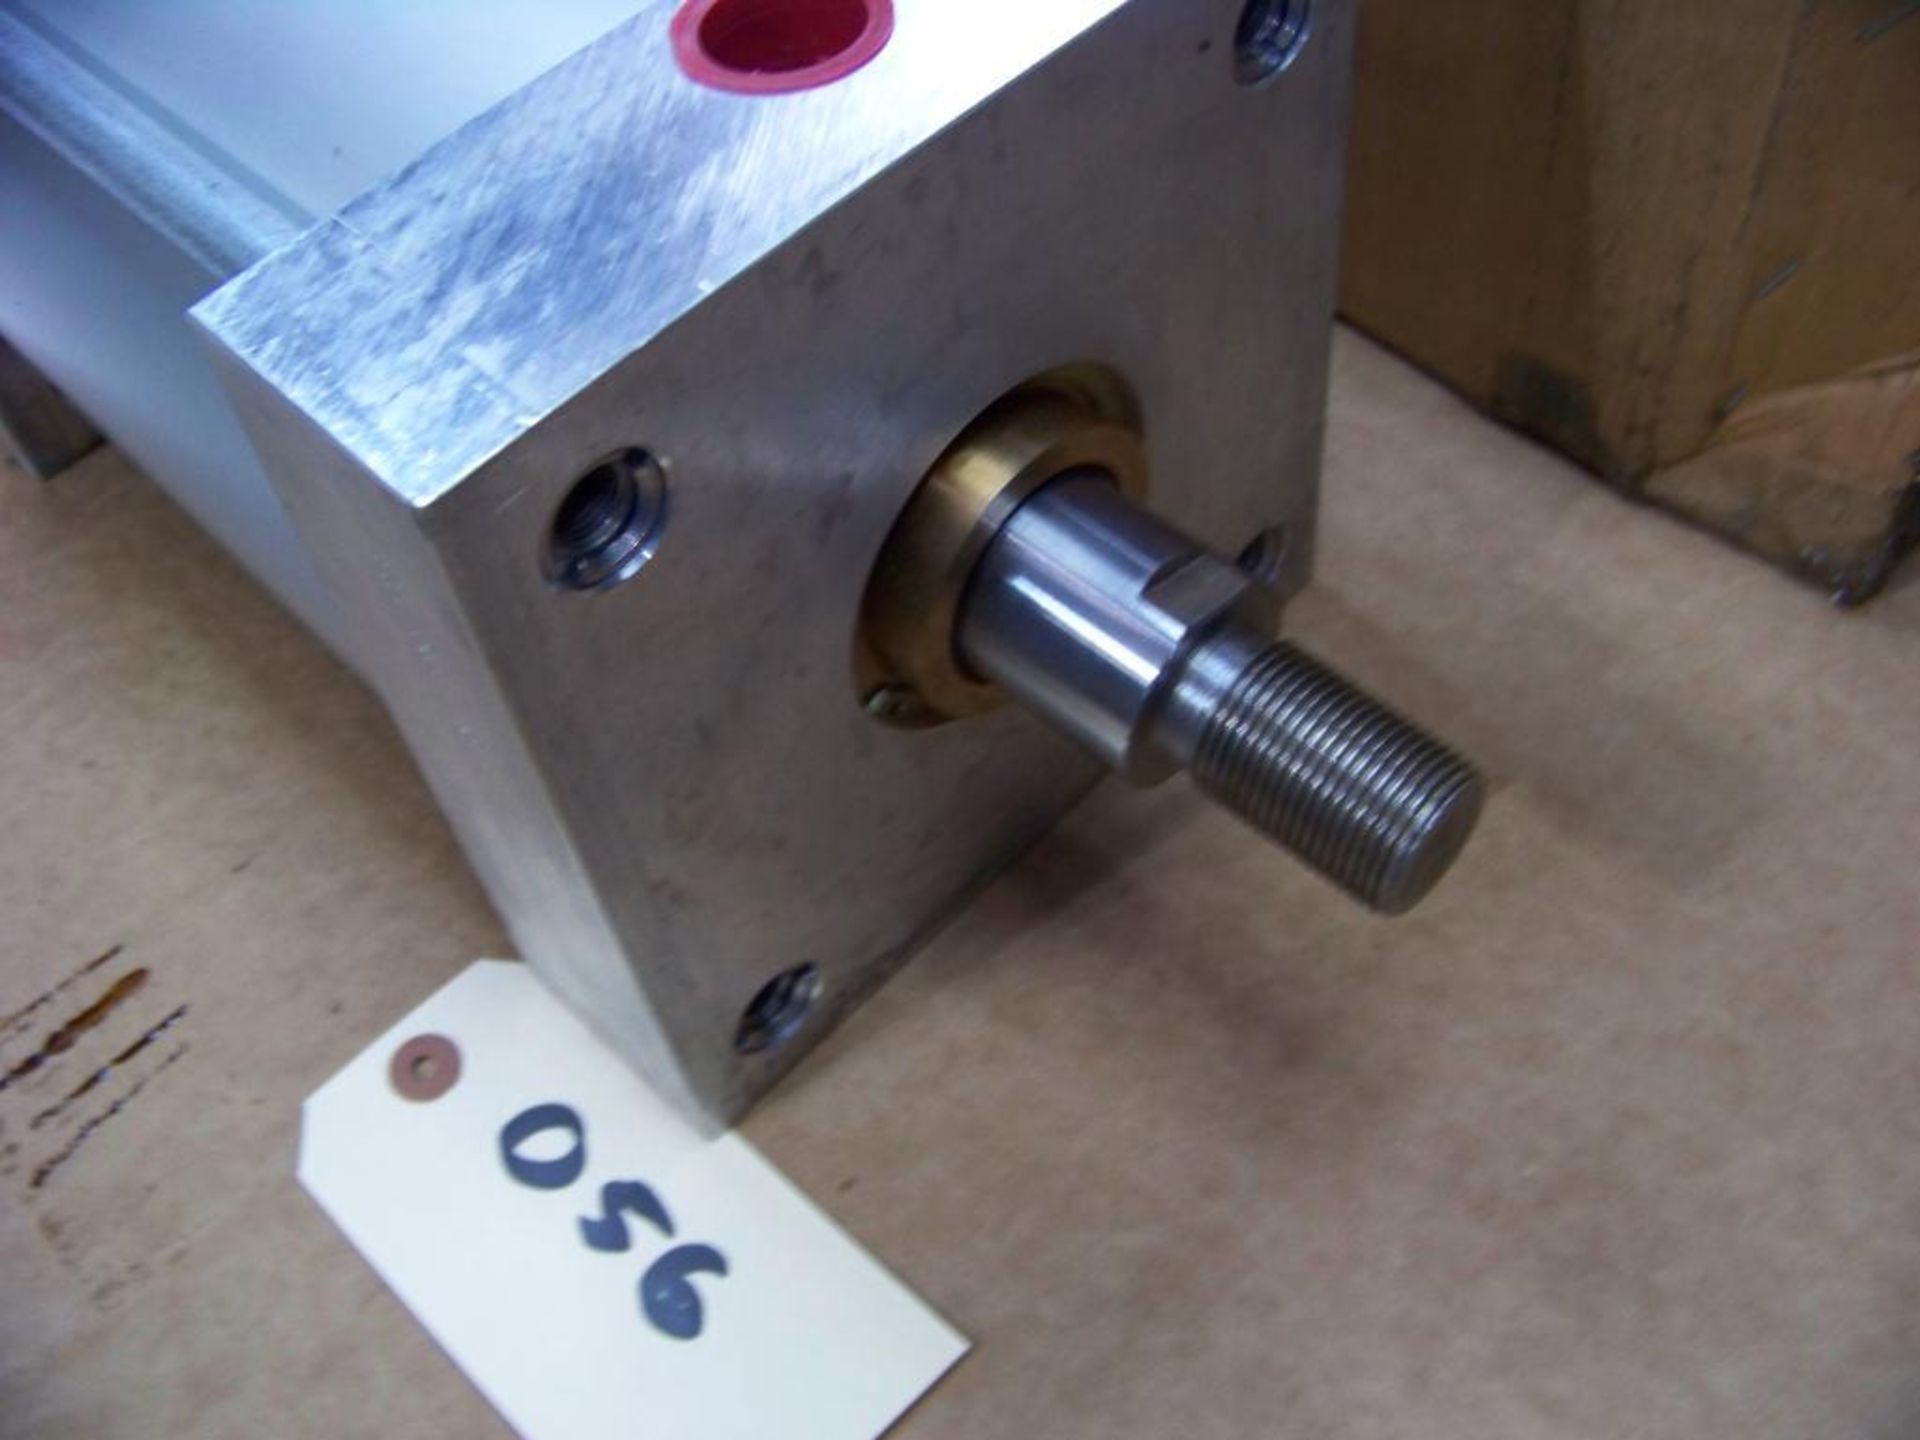 ADVANCE AUTOMATION, EXTRA LARGE PNEUMATIC CYLINDER, 1/2" PORTS, 1-1/2" SHAFT, W/ 5" BORE, NEW IN BOX - Image 4 of 4